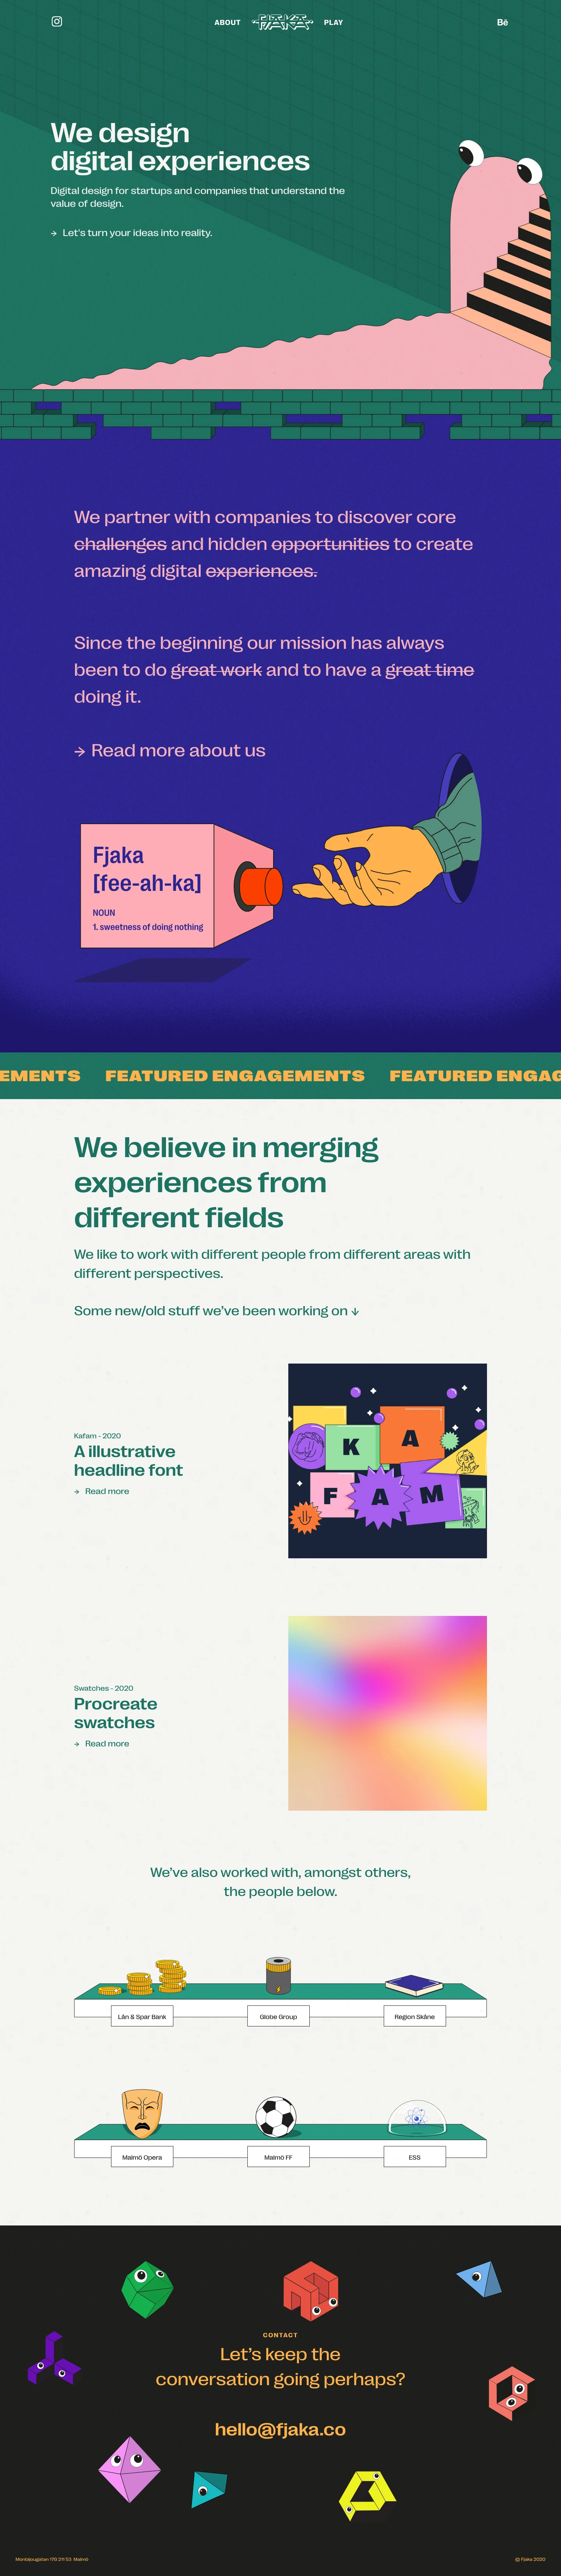 Fjaka Landing Page Example: Fjaka is a Digital experience and branding company based in Malmö, Sweden. We create digital products, services and immersive experiences.